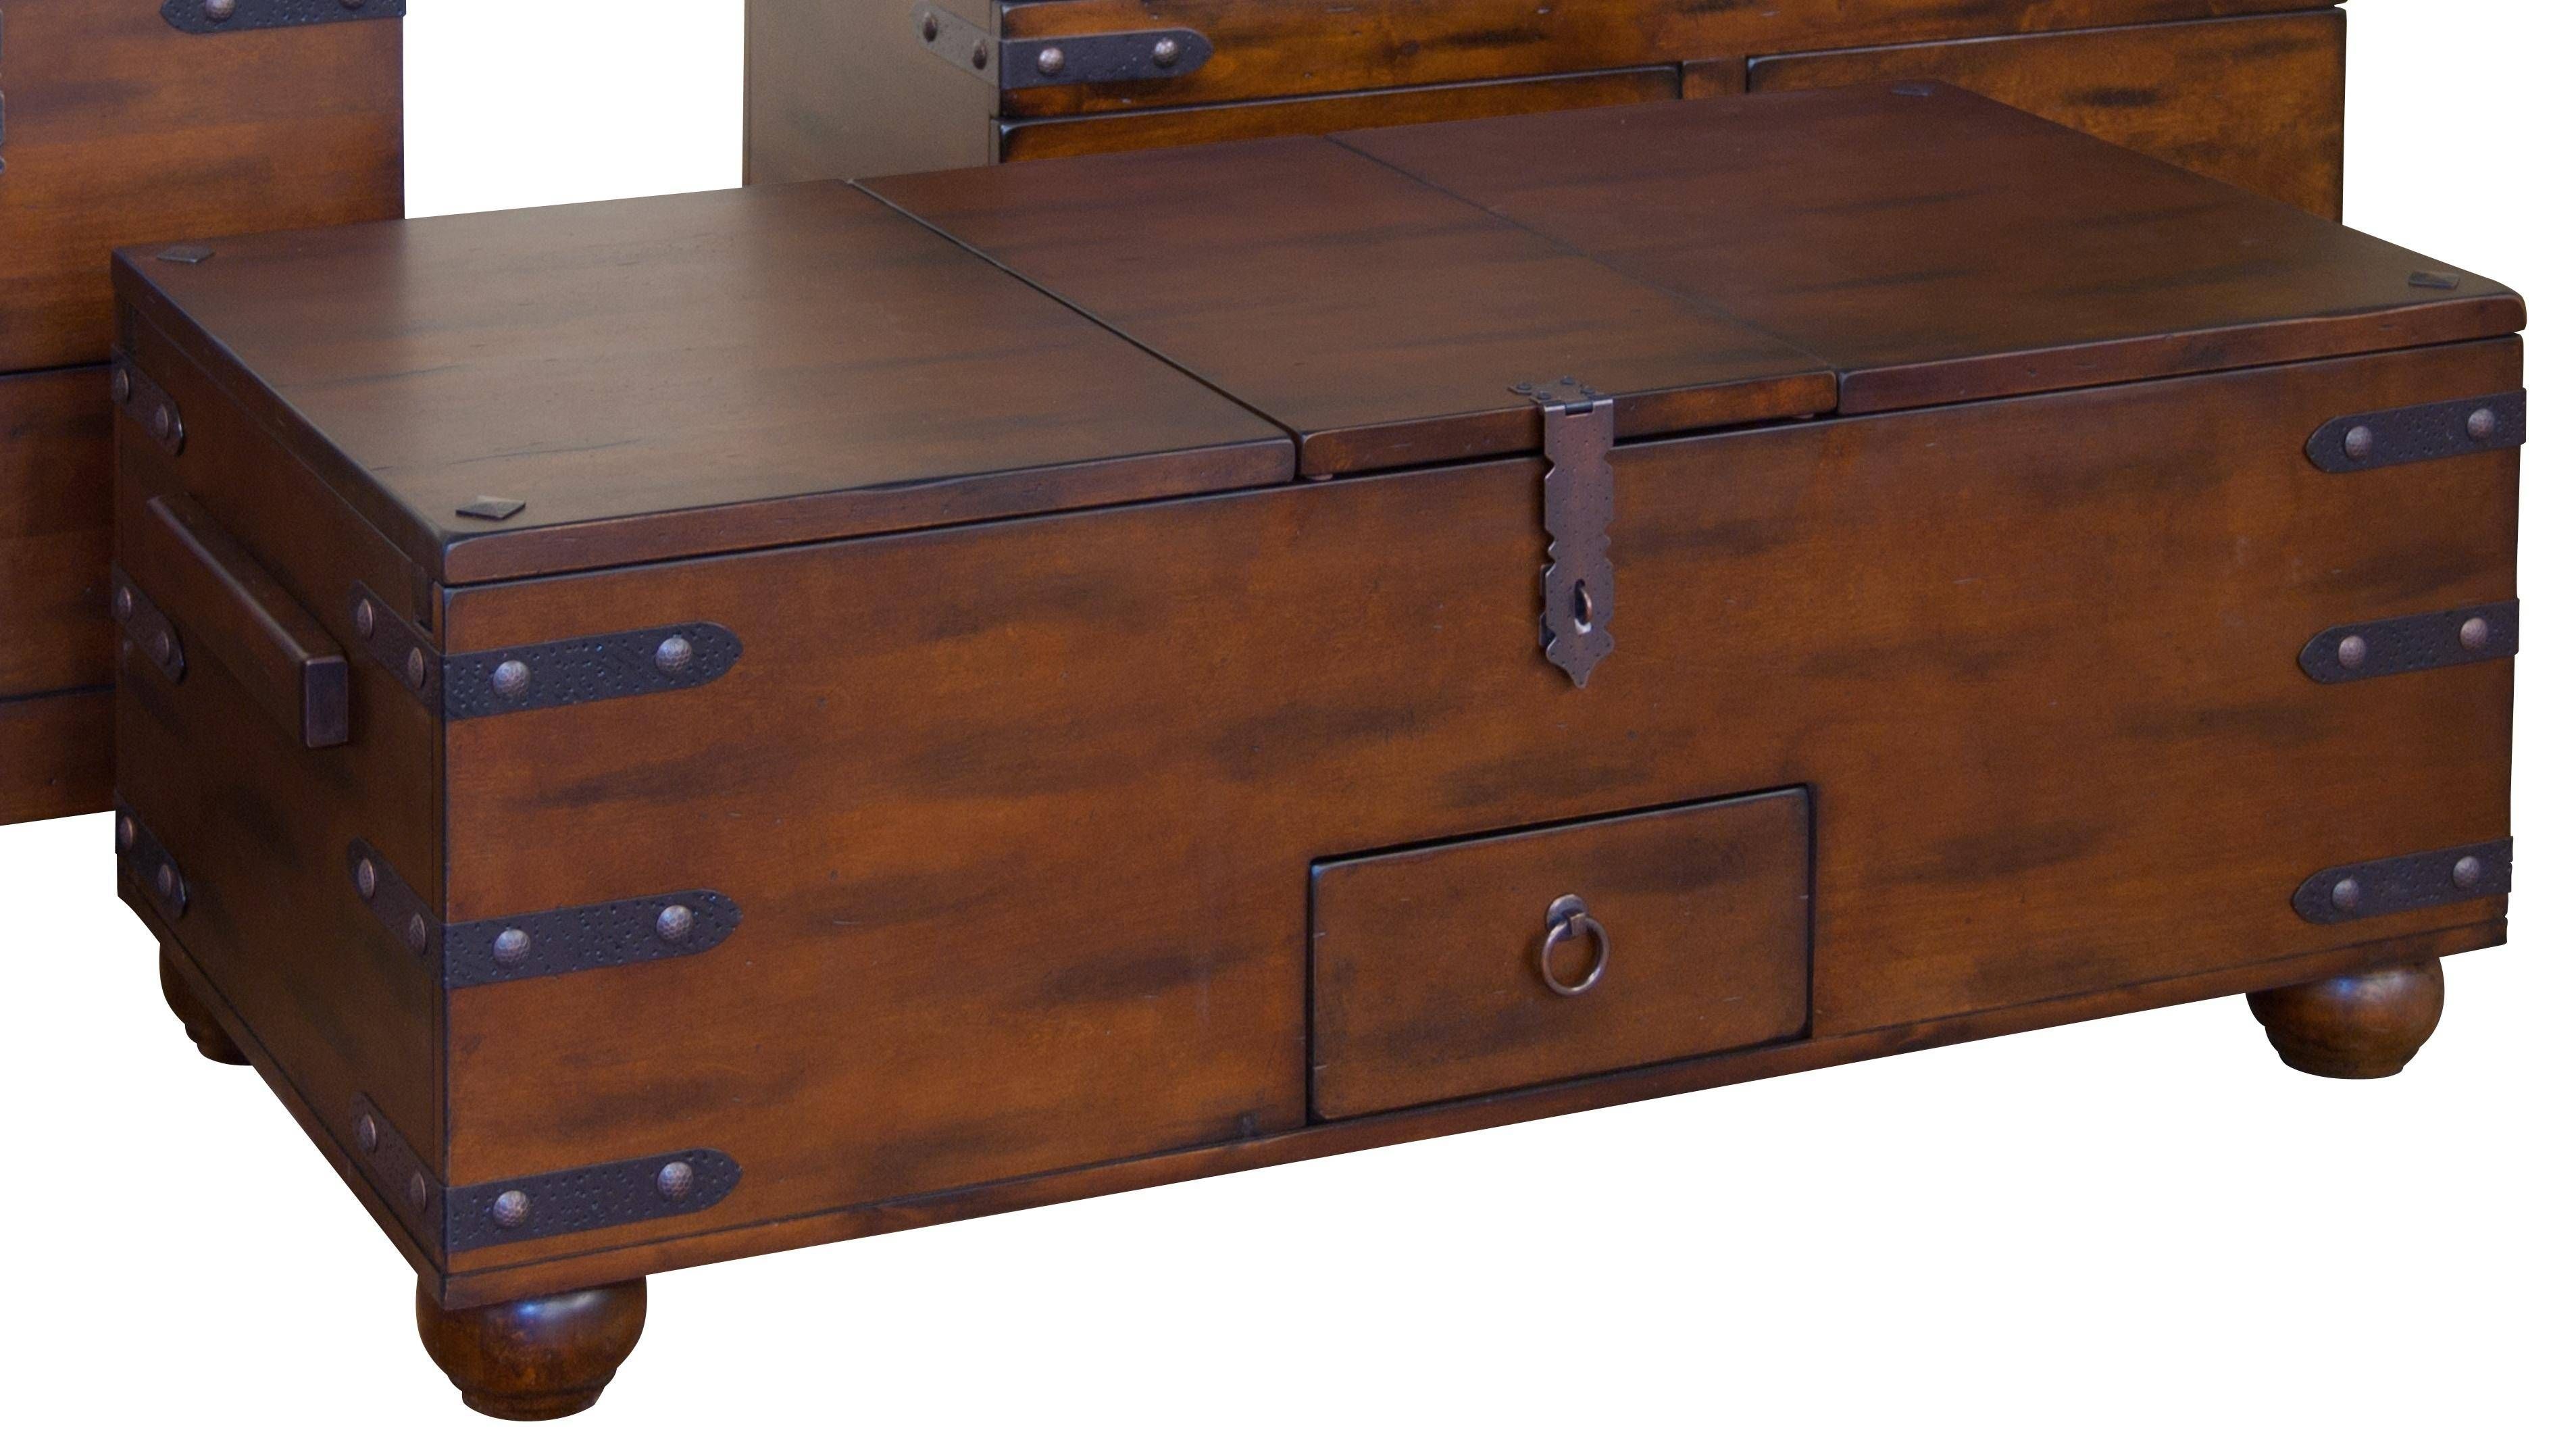 Coffee Table: Popular Storage Trunk Coffee Table Design Ideas Intended For Storage Trunk Coffee Tables (View 3 of 30)